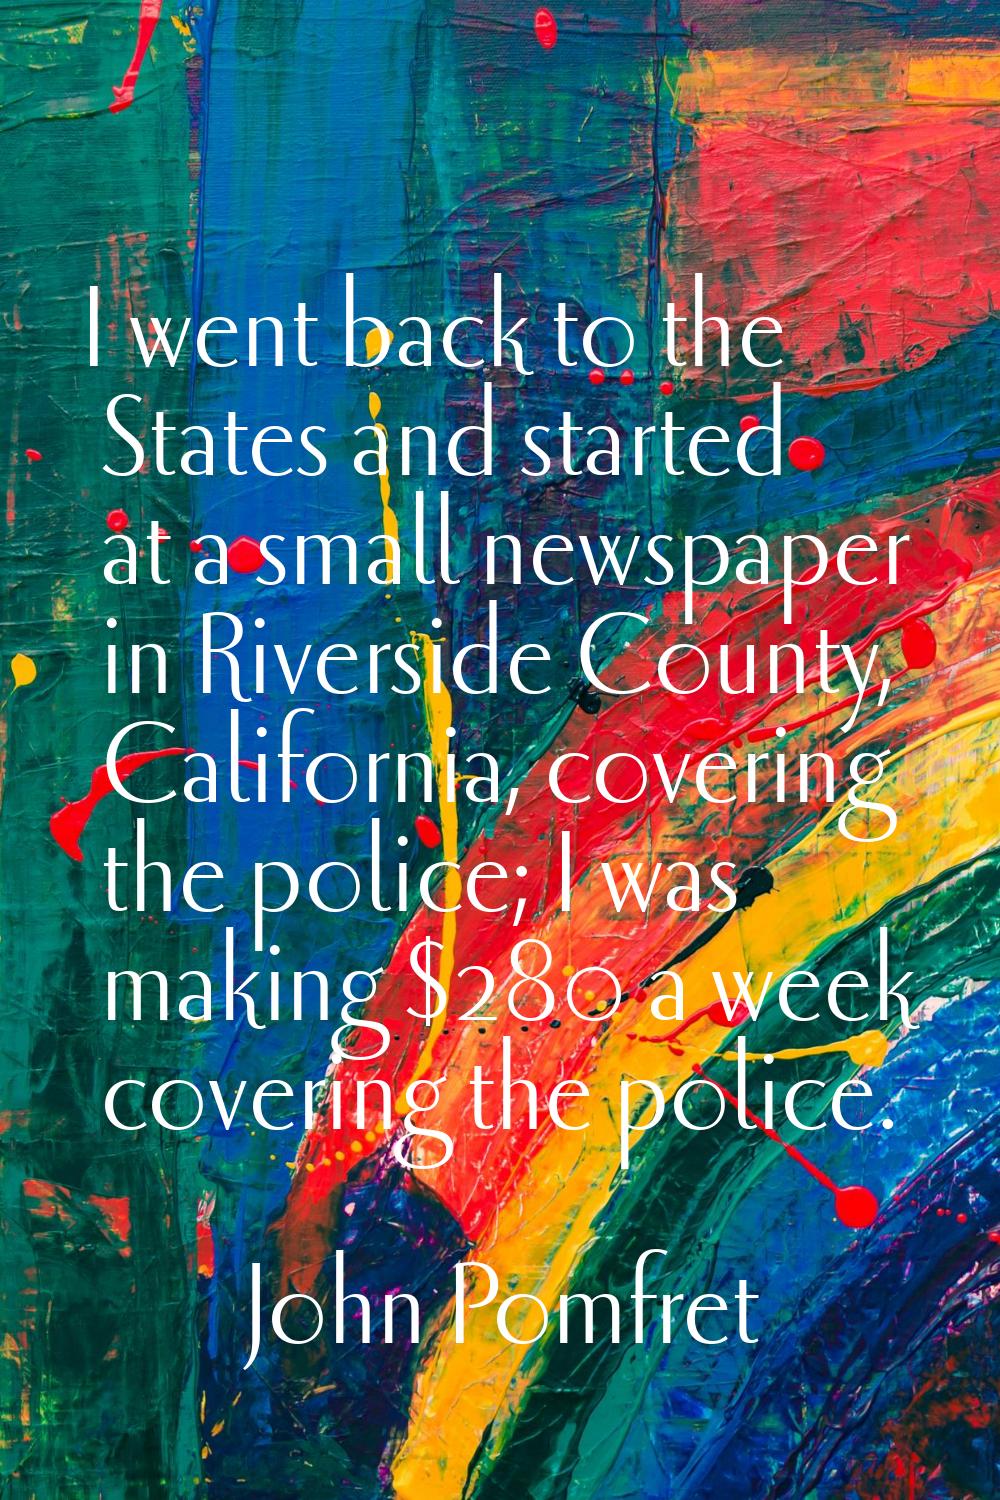 I went back to the States and started at a small newspaper in Riverside County, California, coverin